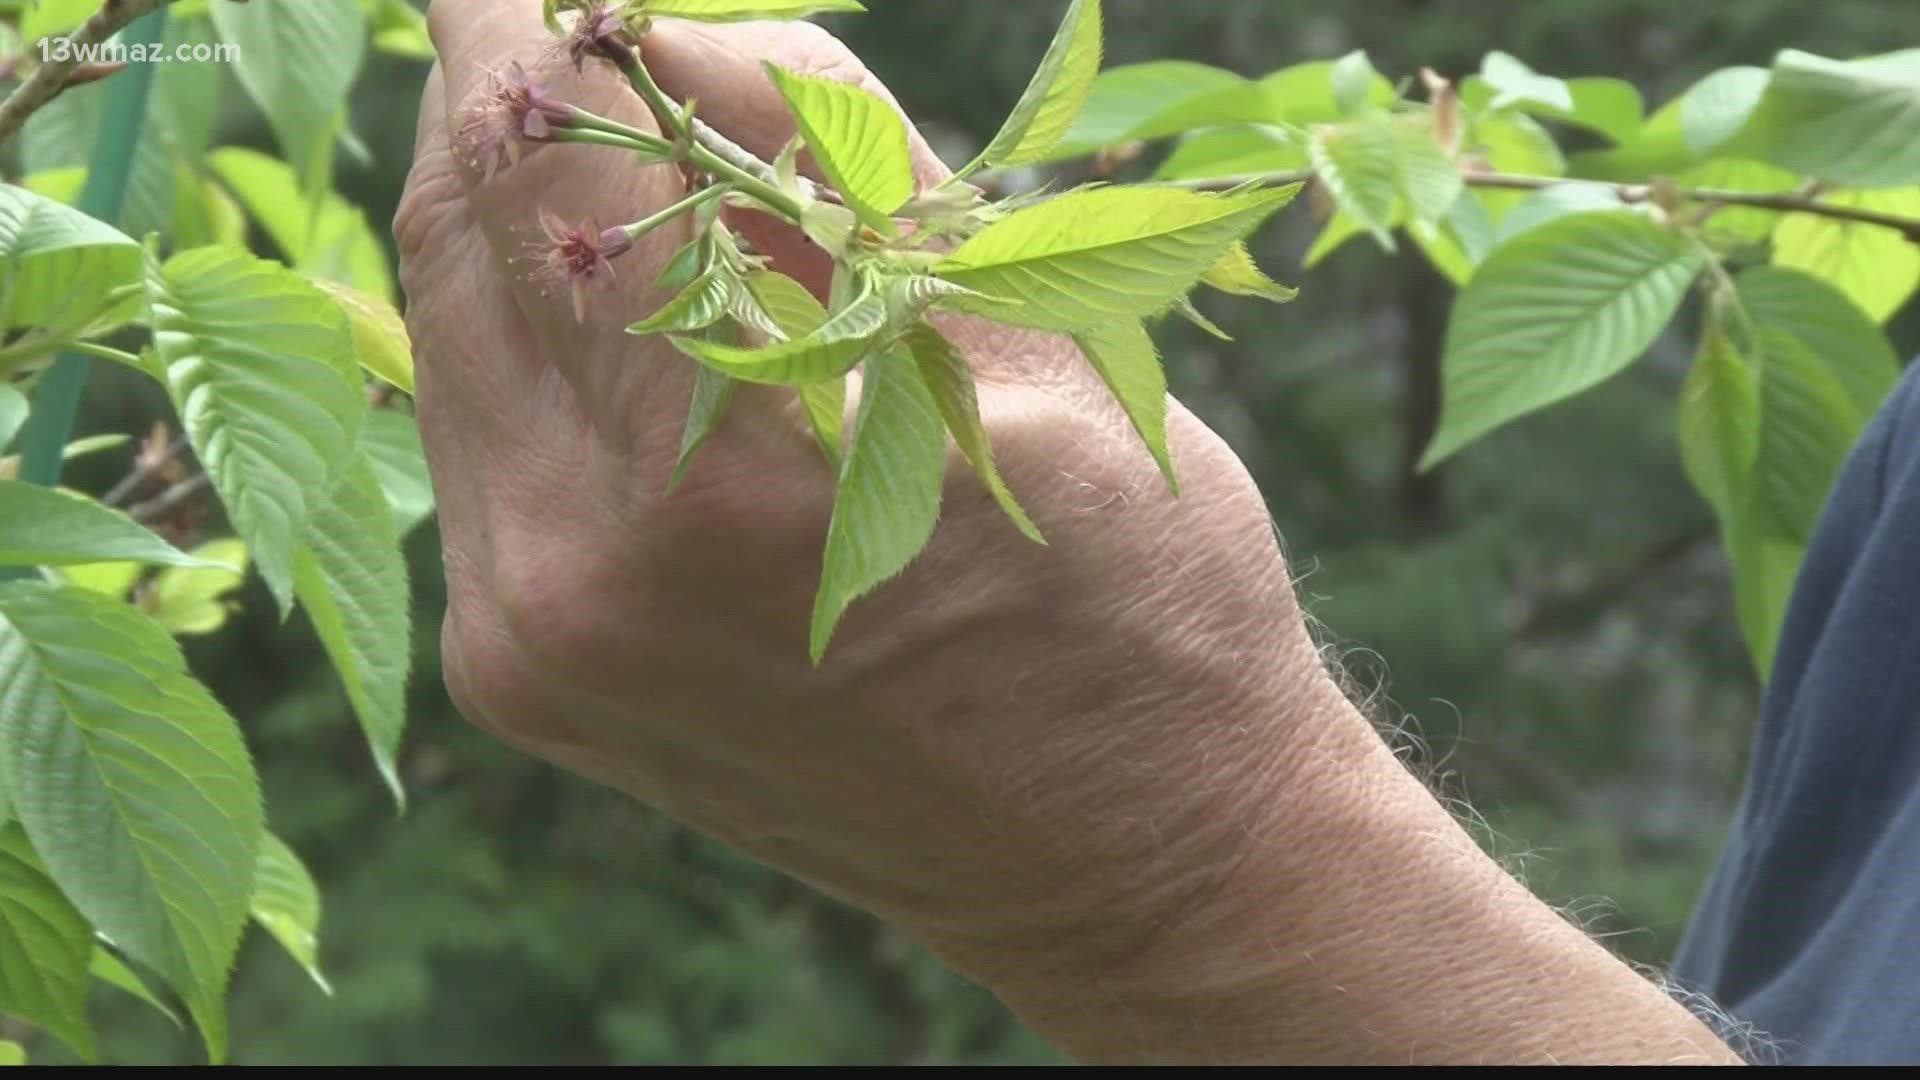 Some master gardeners are experimenting with new varieties that handle Macon's warm weather better.